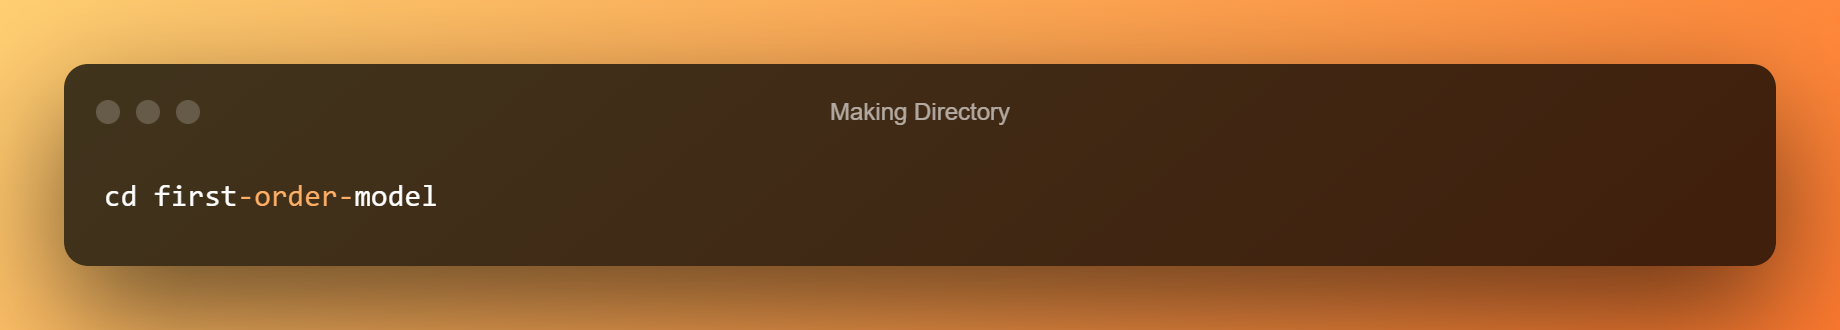 Making Directory